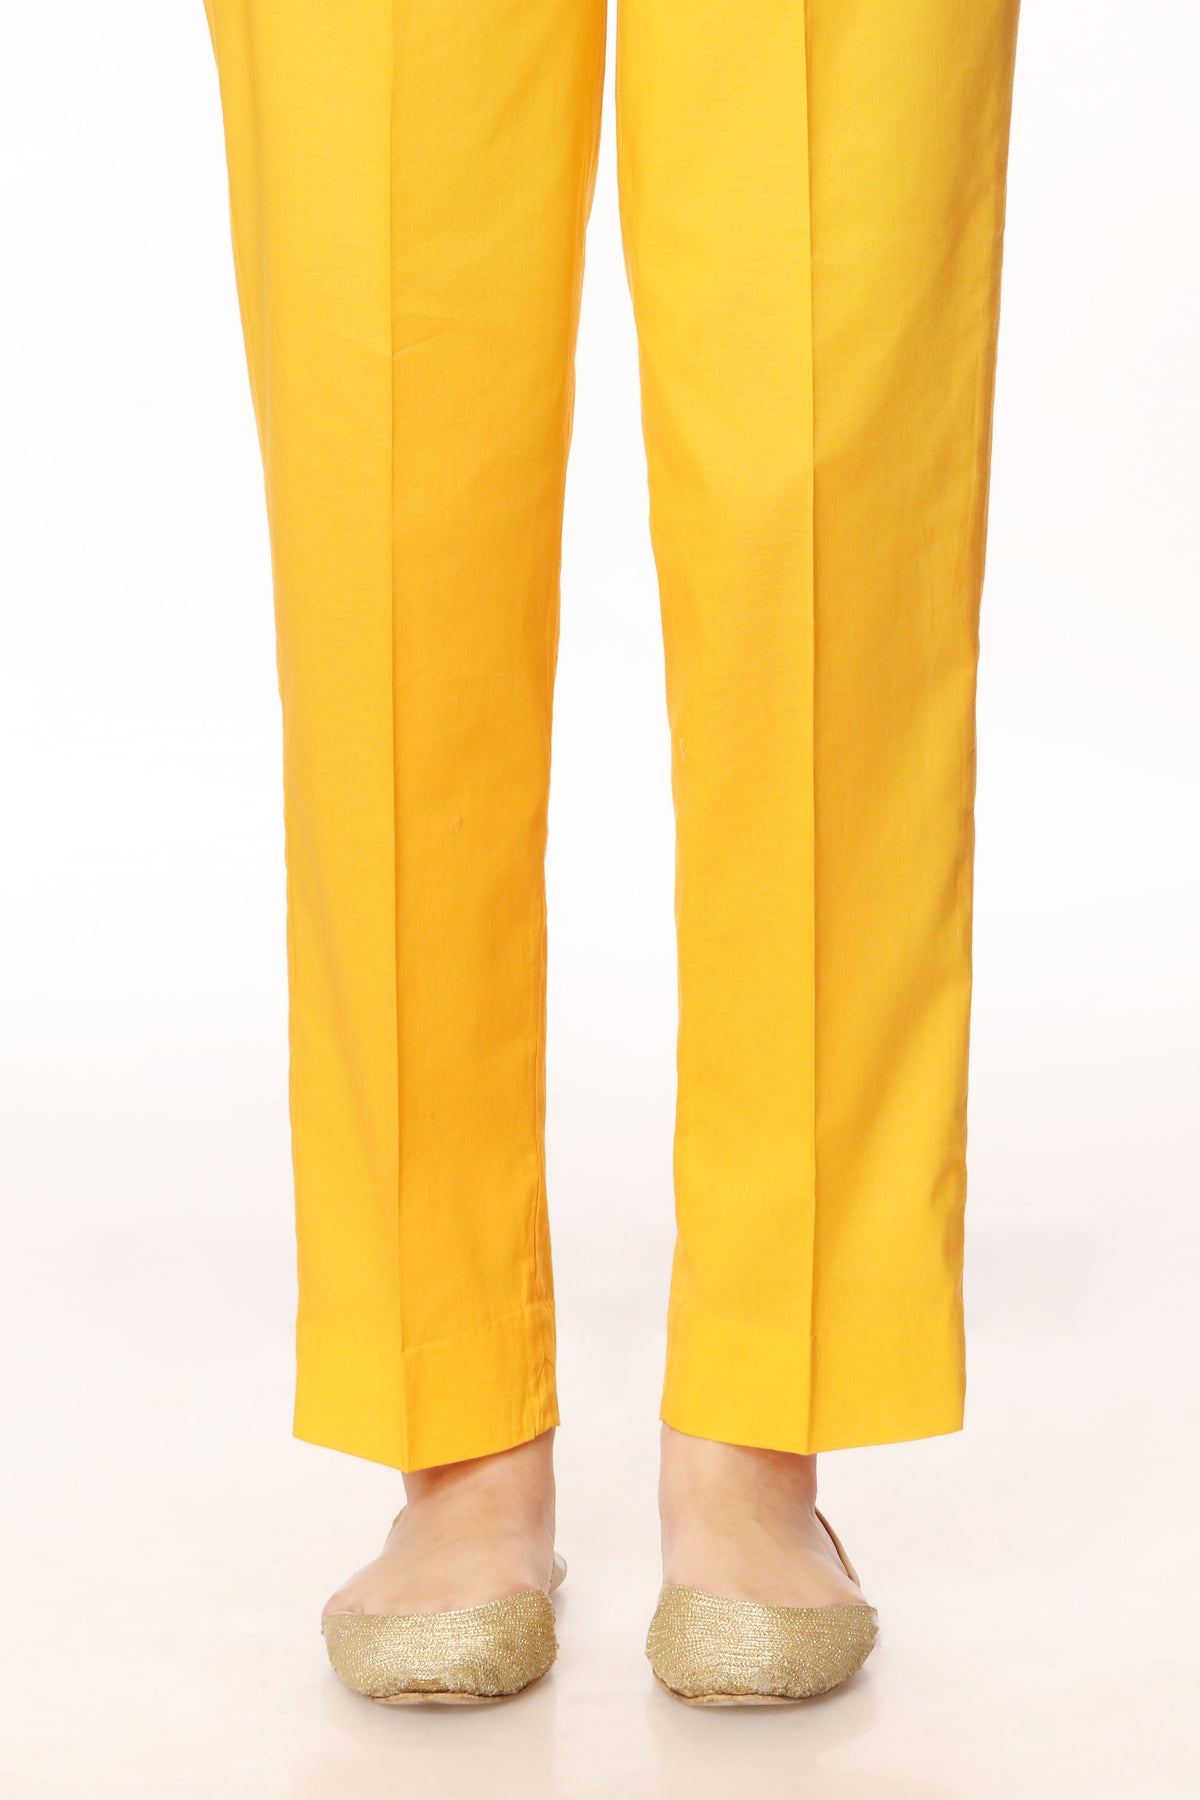 Mustard Trouser in Mustard coloured Printed Lawn fabric